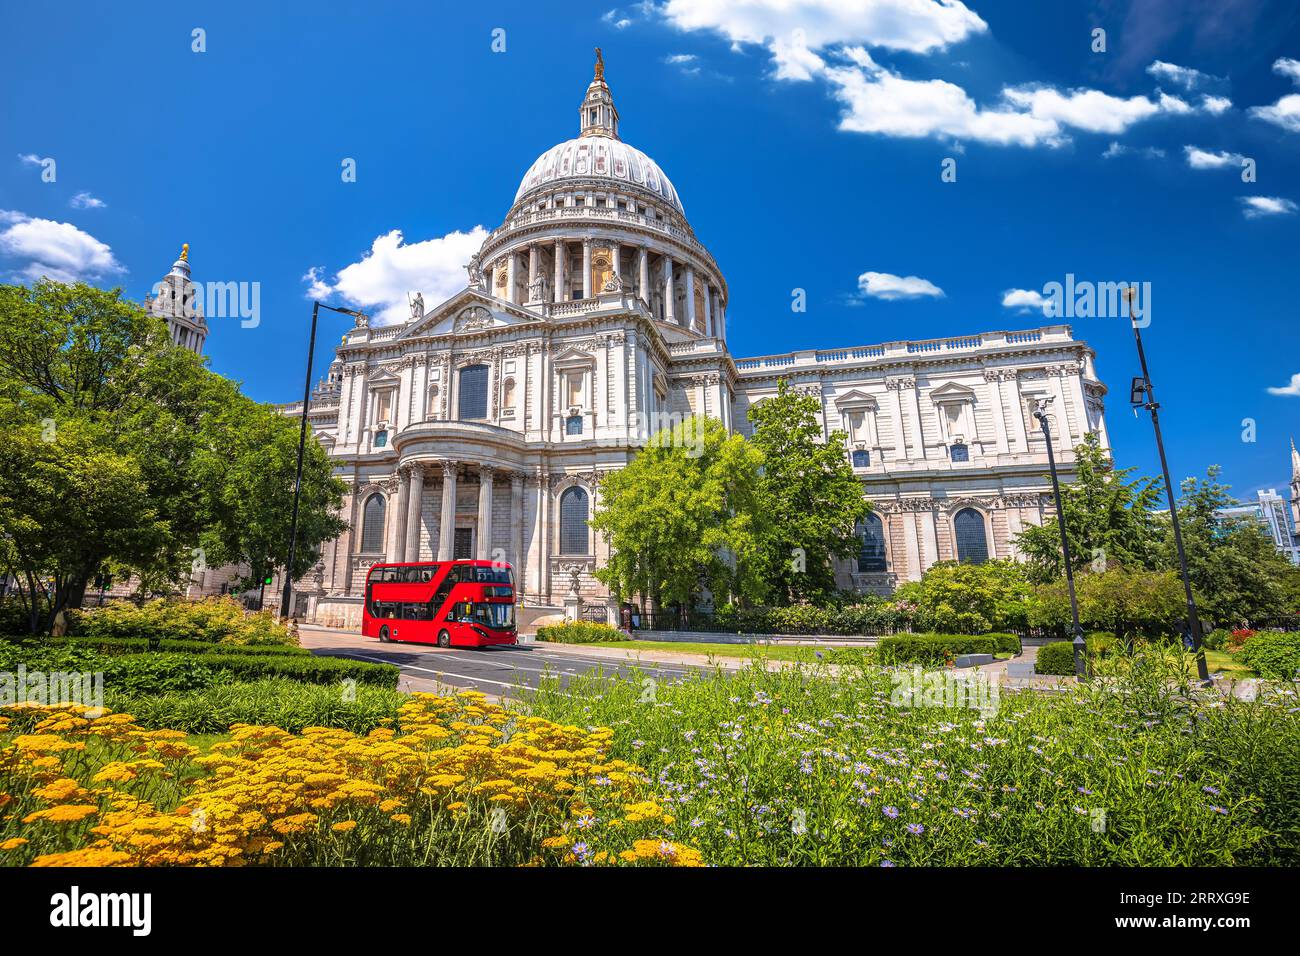 Saint Paul's Cathedral in London street view, capital of UK Stock Photo